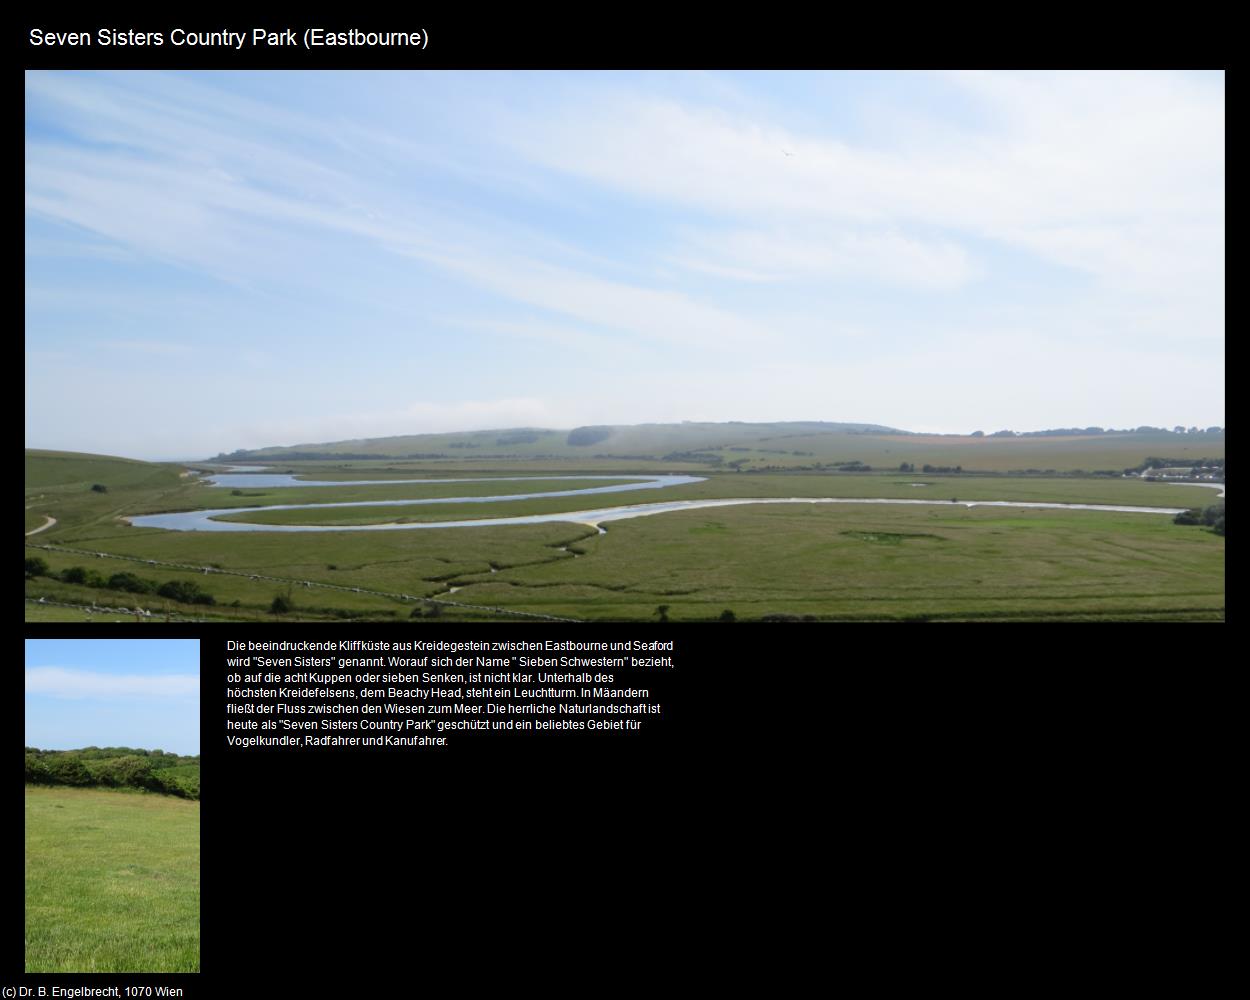 Seven Sisters Country Park (Eastbourne, England ) in Kulturatlas-ENGLAND und WALES